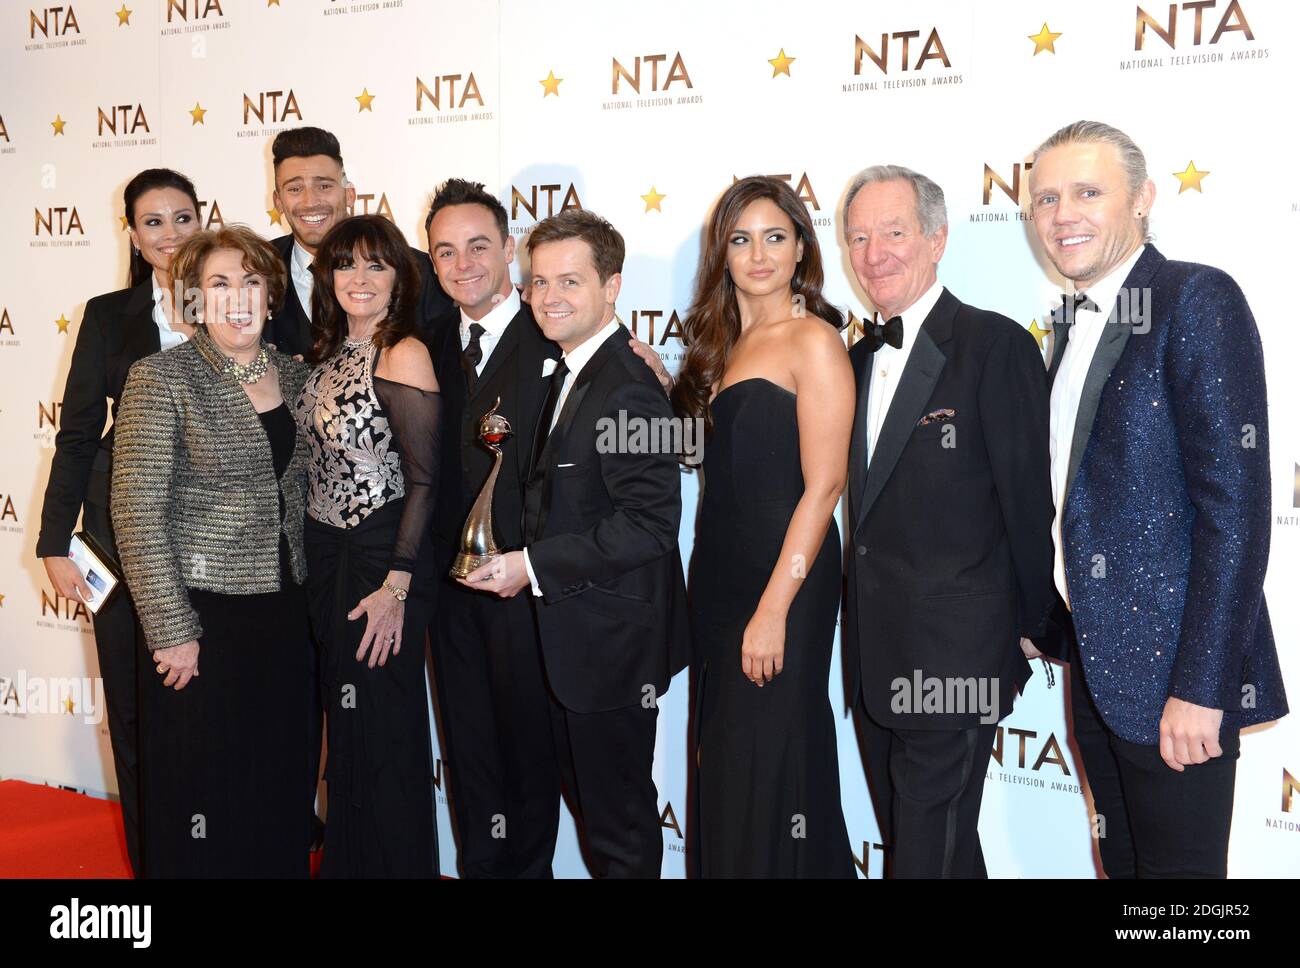 Ant and Dec (I'm A Celebrity) with Melanie Sykes, Edwina Currie, Jake Quickenden, Vikki Michelle, Nadia Forde, Michael Buerk and Jimmy Bullard with the award for Best Entertainment Programme in the press room at the National Television Awards 2015, held at the O2 Arena, London  This year the NTA's are celebrating their 20th year. Stock Photo